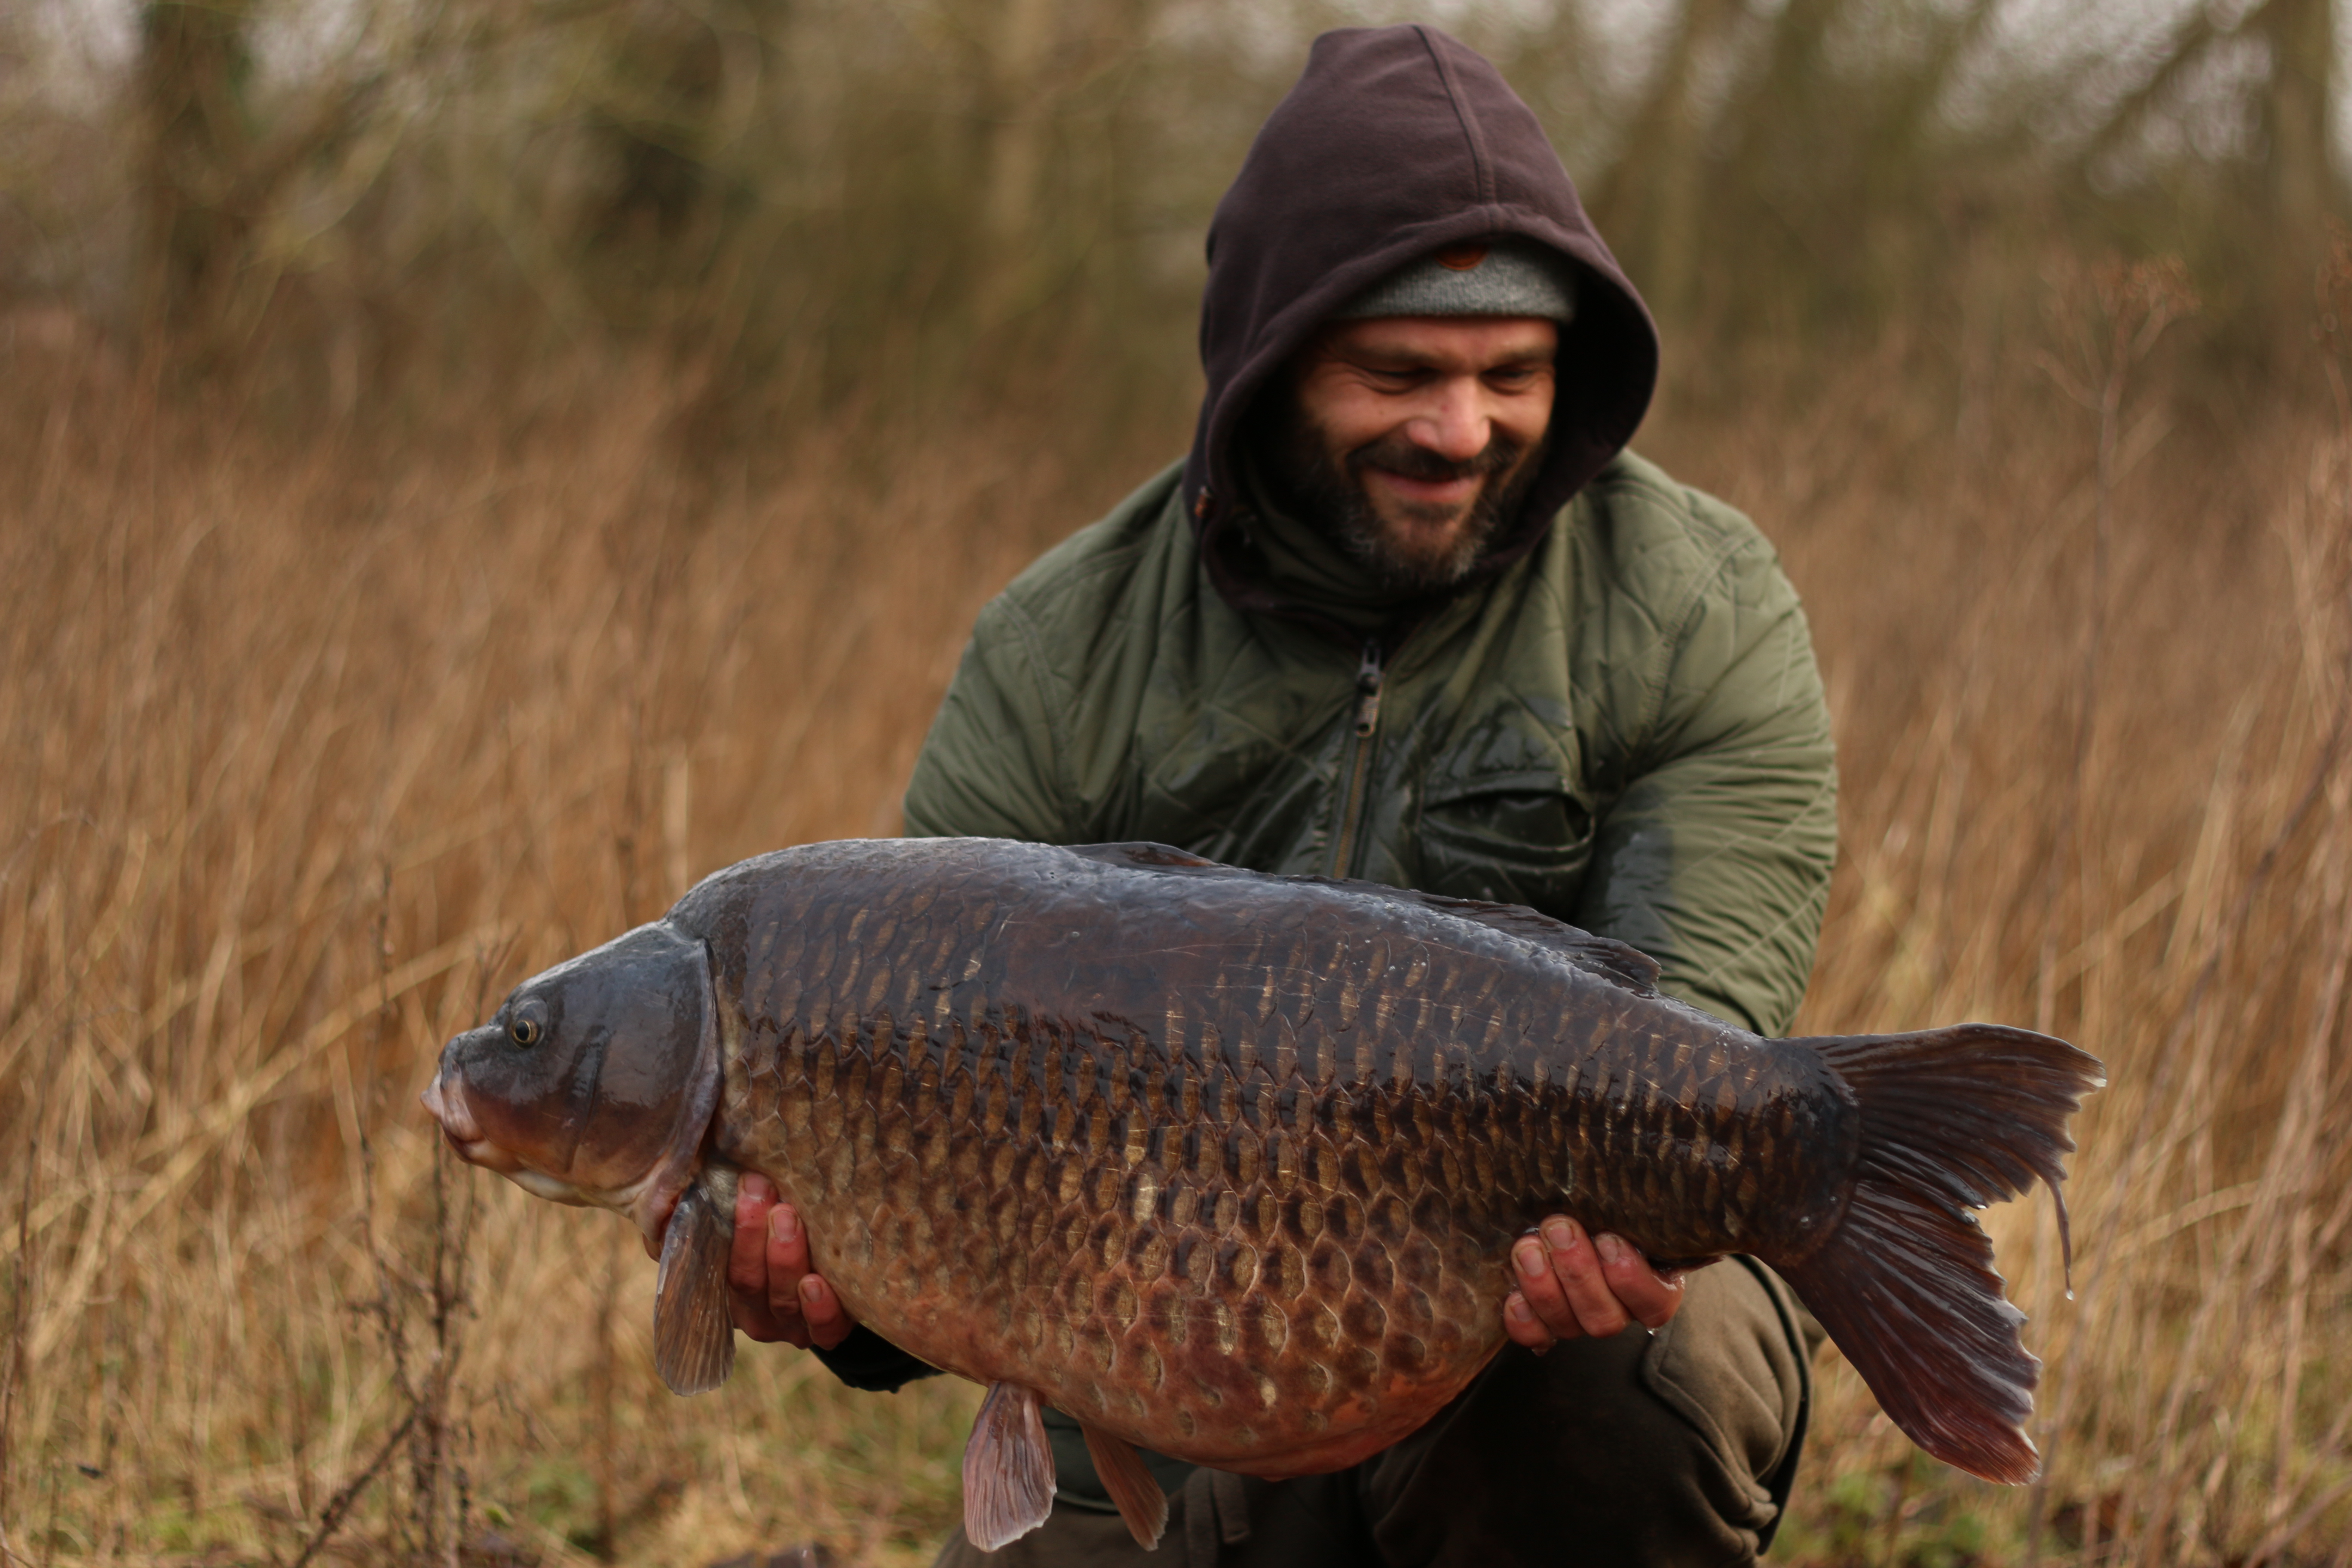 https://thinkinganglers.com/wp-content/uploads/2019/10/PIC-11-An-ice-breaker-of-a-common-carp-caught-in-baltic-January-conditions.jpg